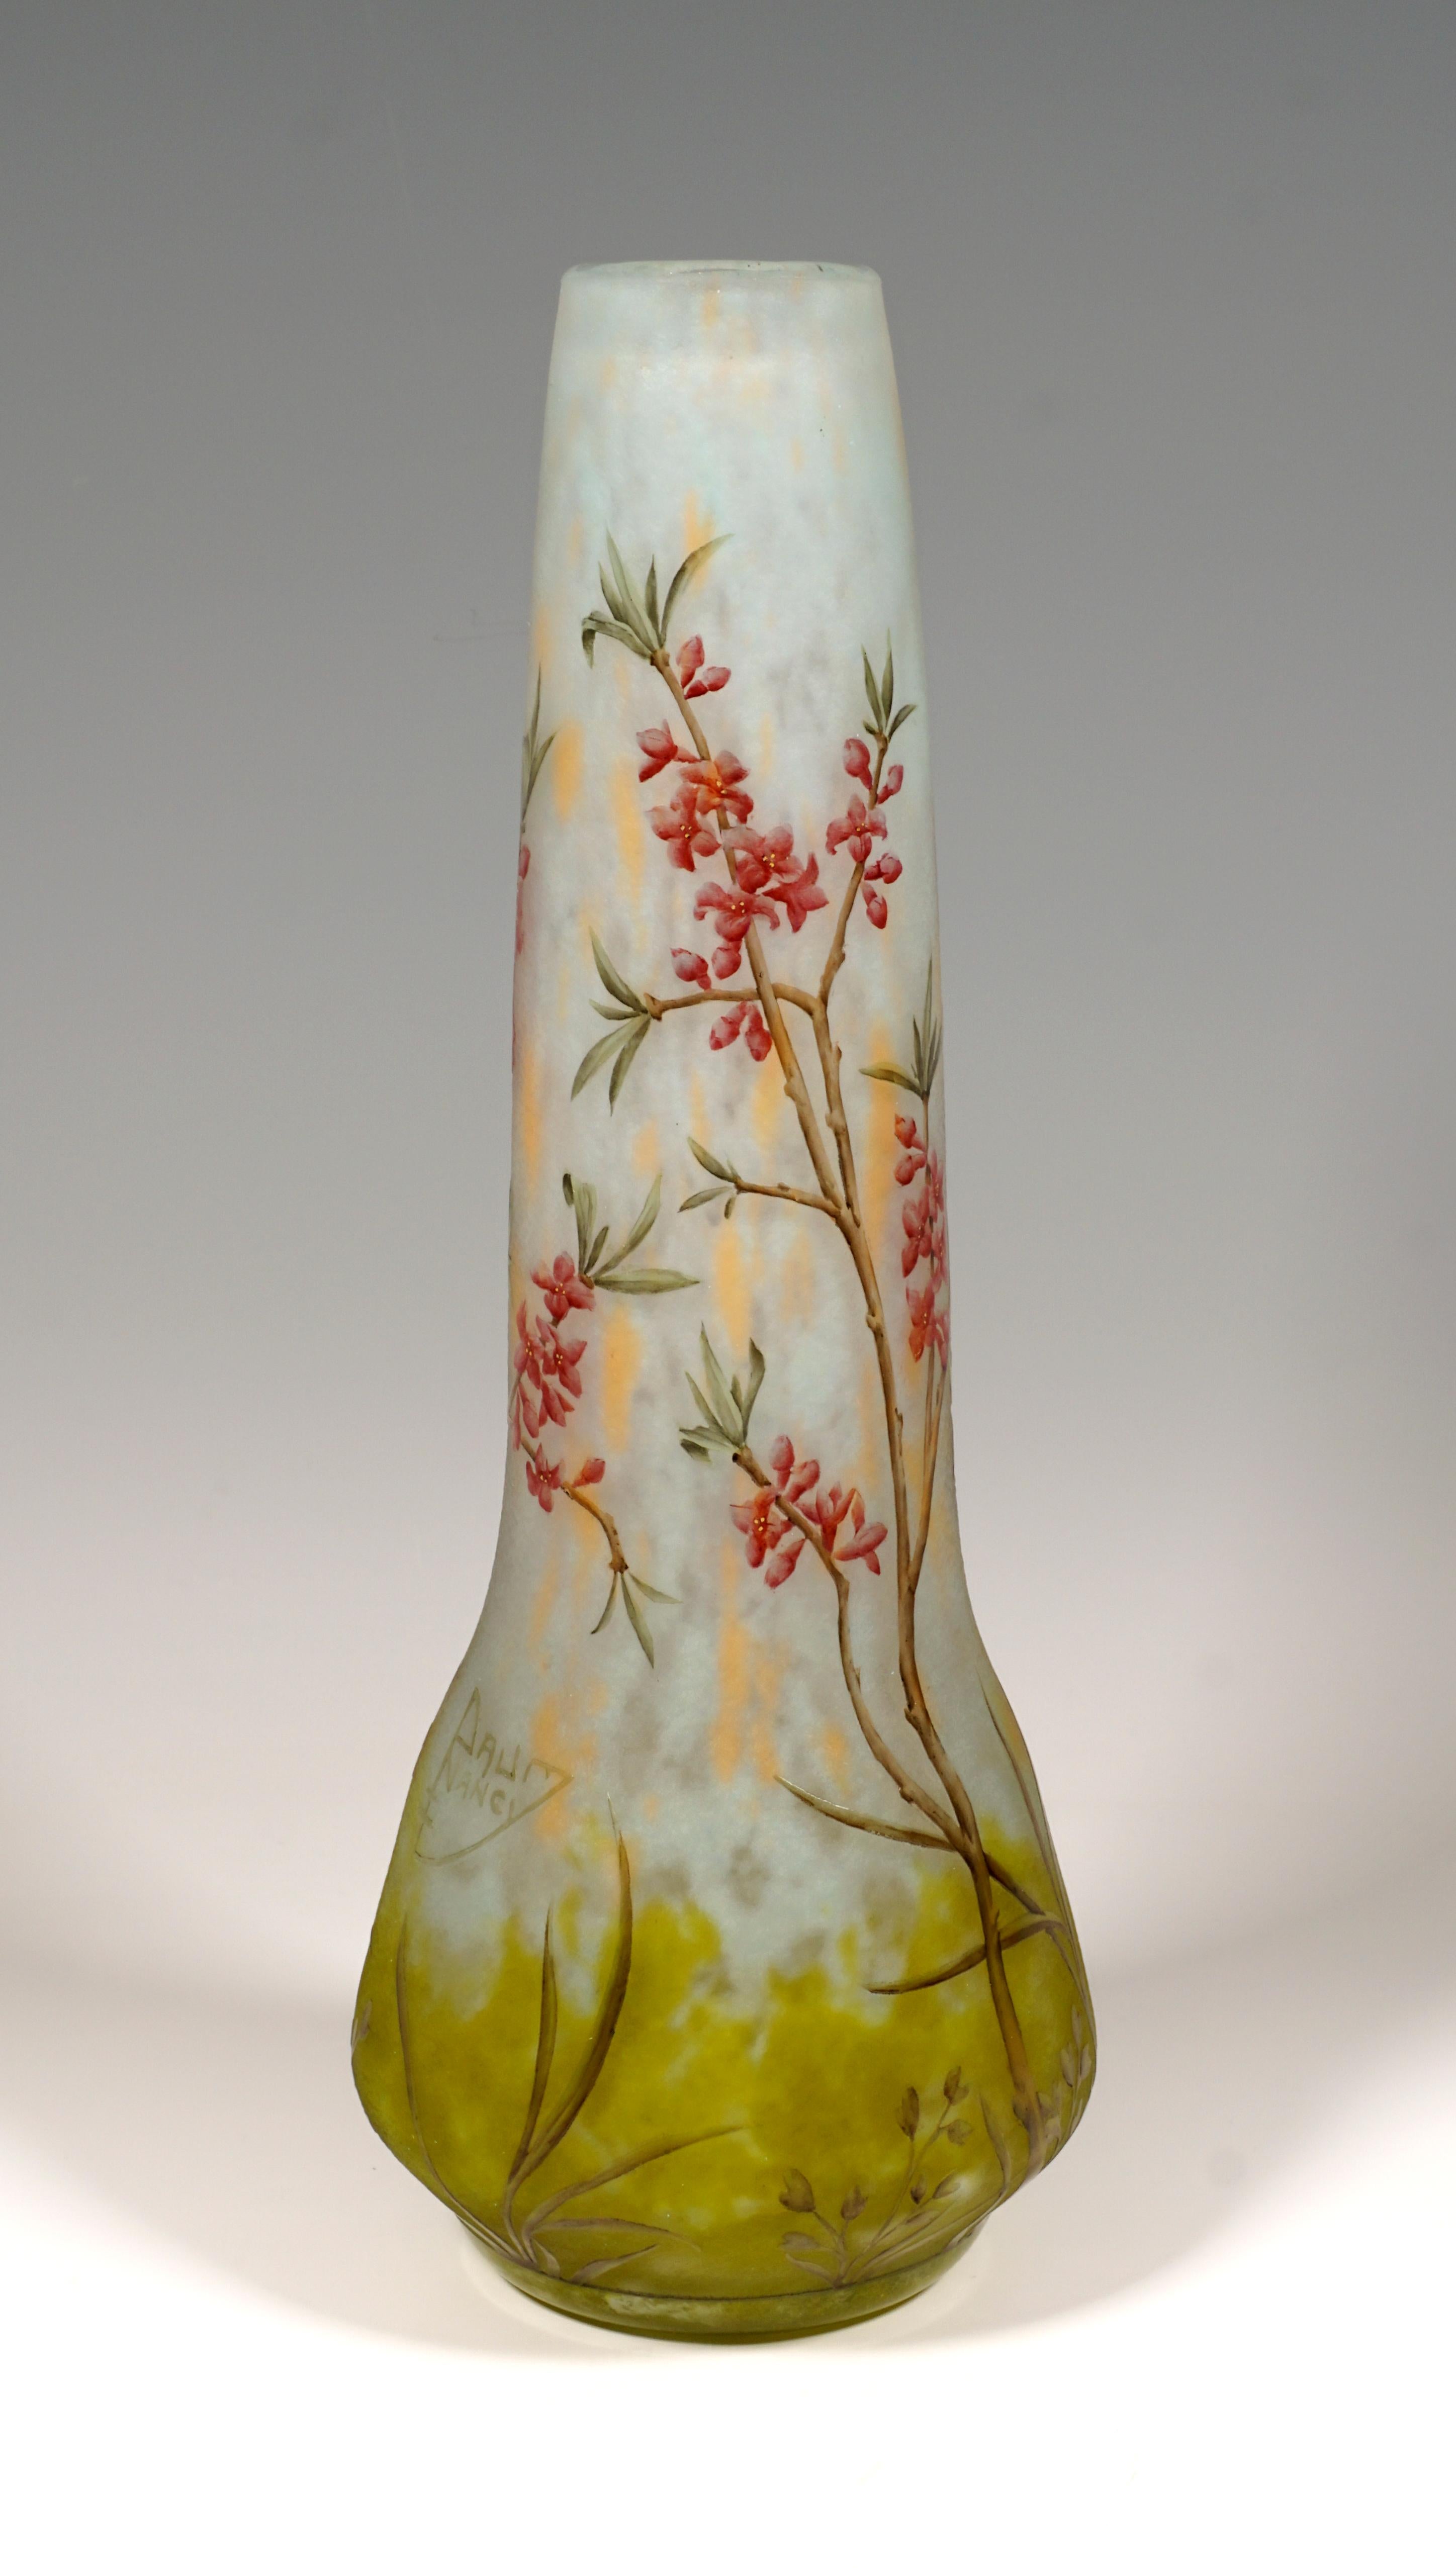 Large long neck vase vase with a bulbous base and a round stand and a neck that tapers towards the top, colorless glass with flaky white and yellow, in the stand area with light green powder melts, with etched delicate Daphne decor painted in